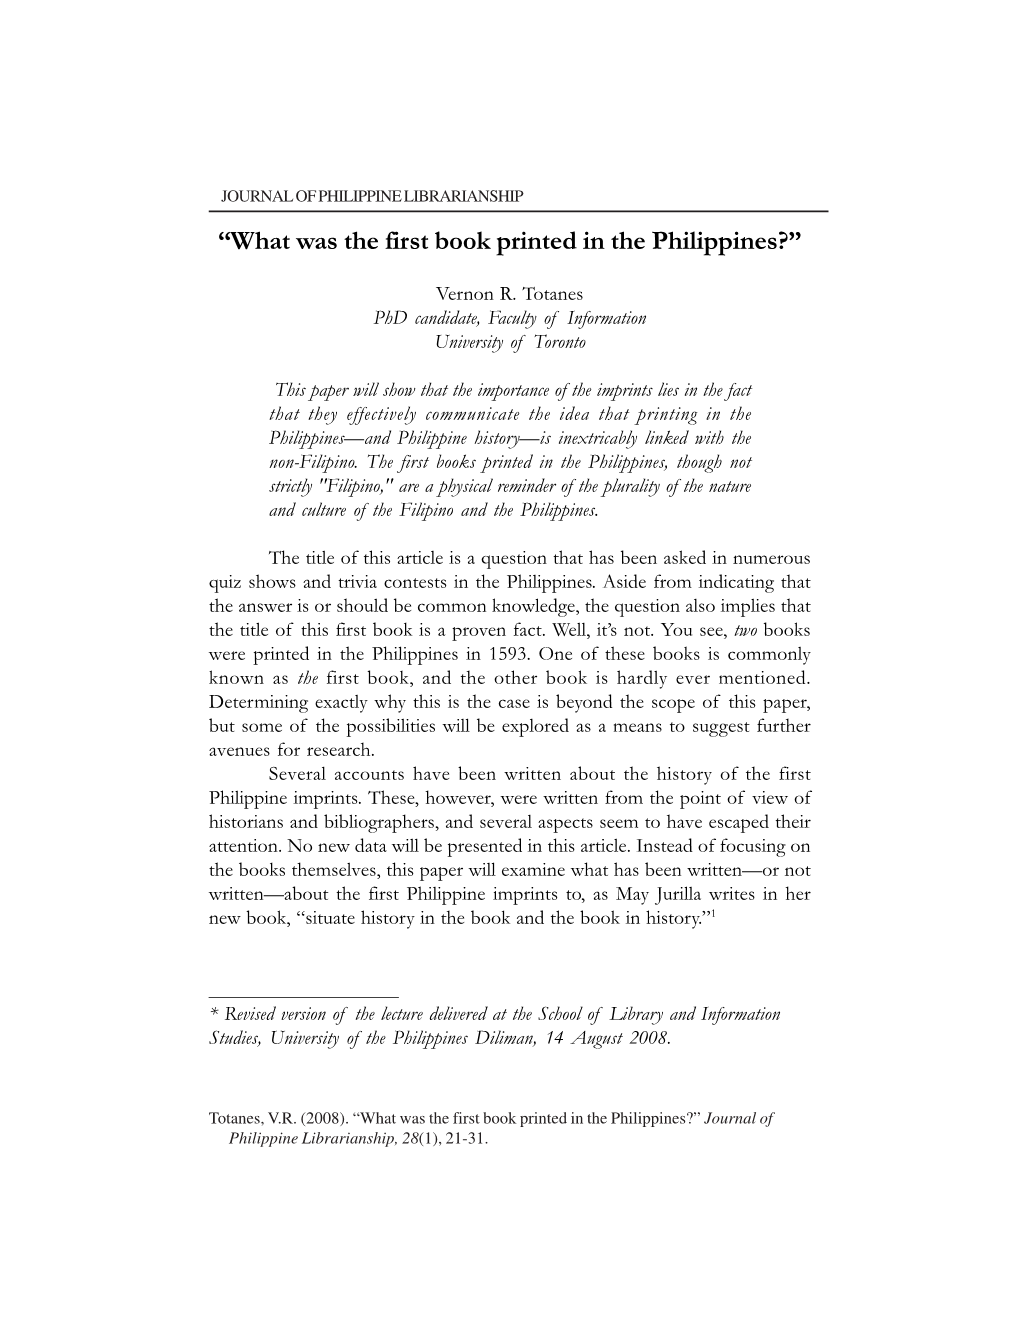 What Was the First Book Printed in the Philippines?”